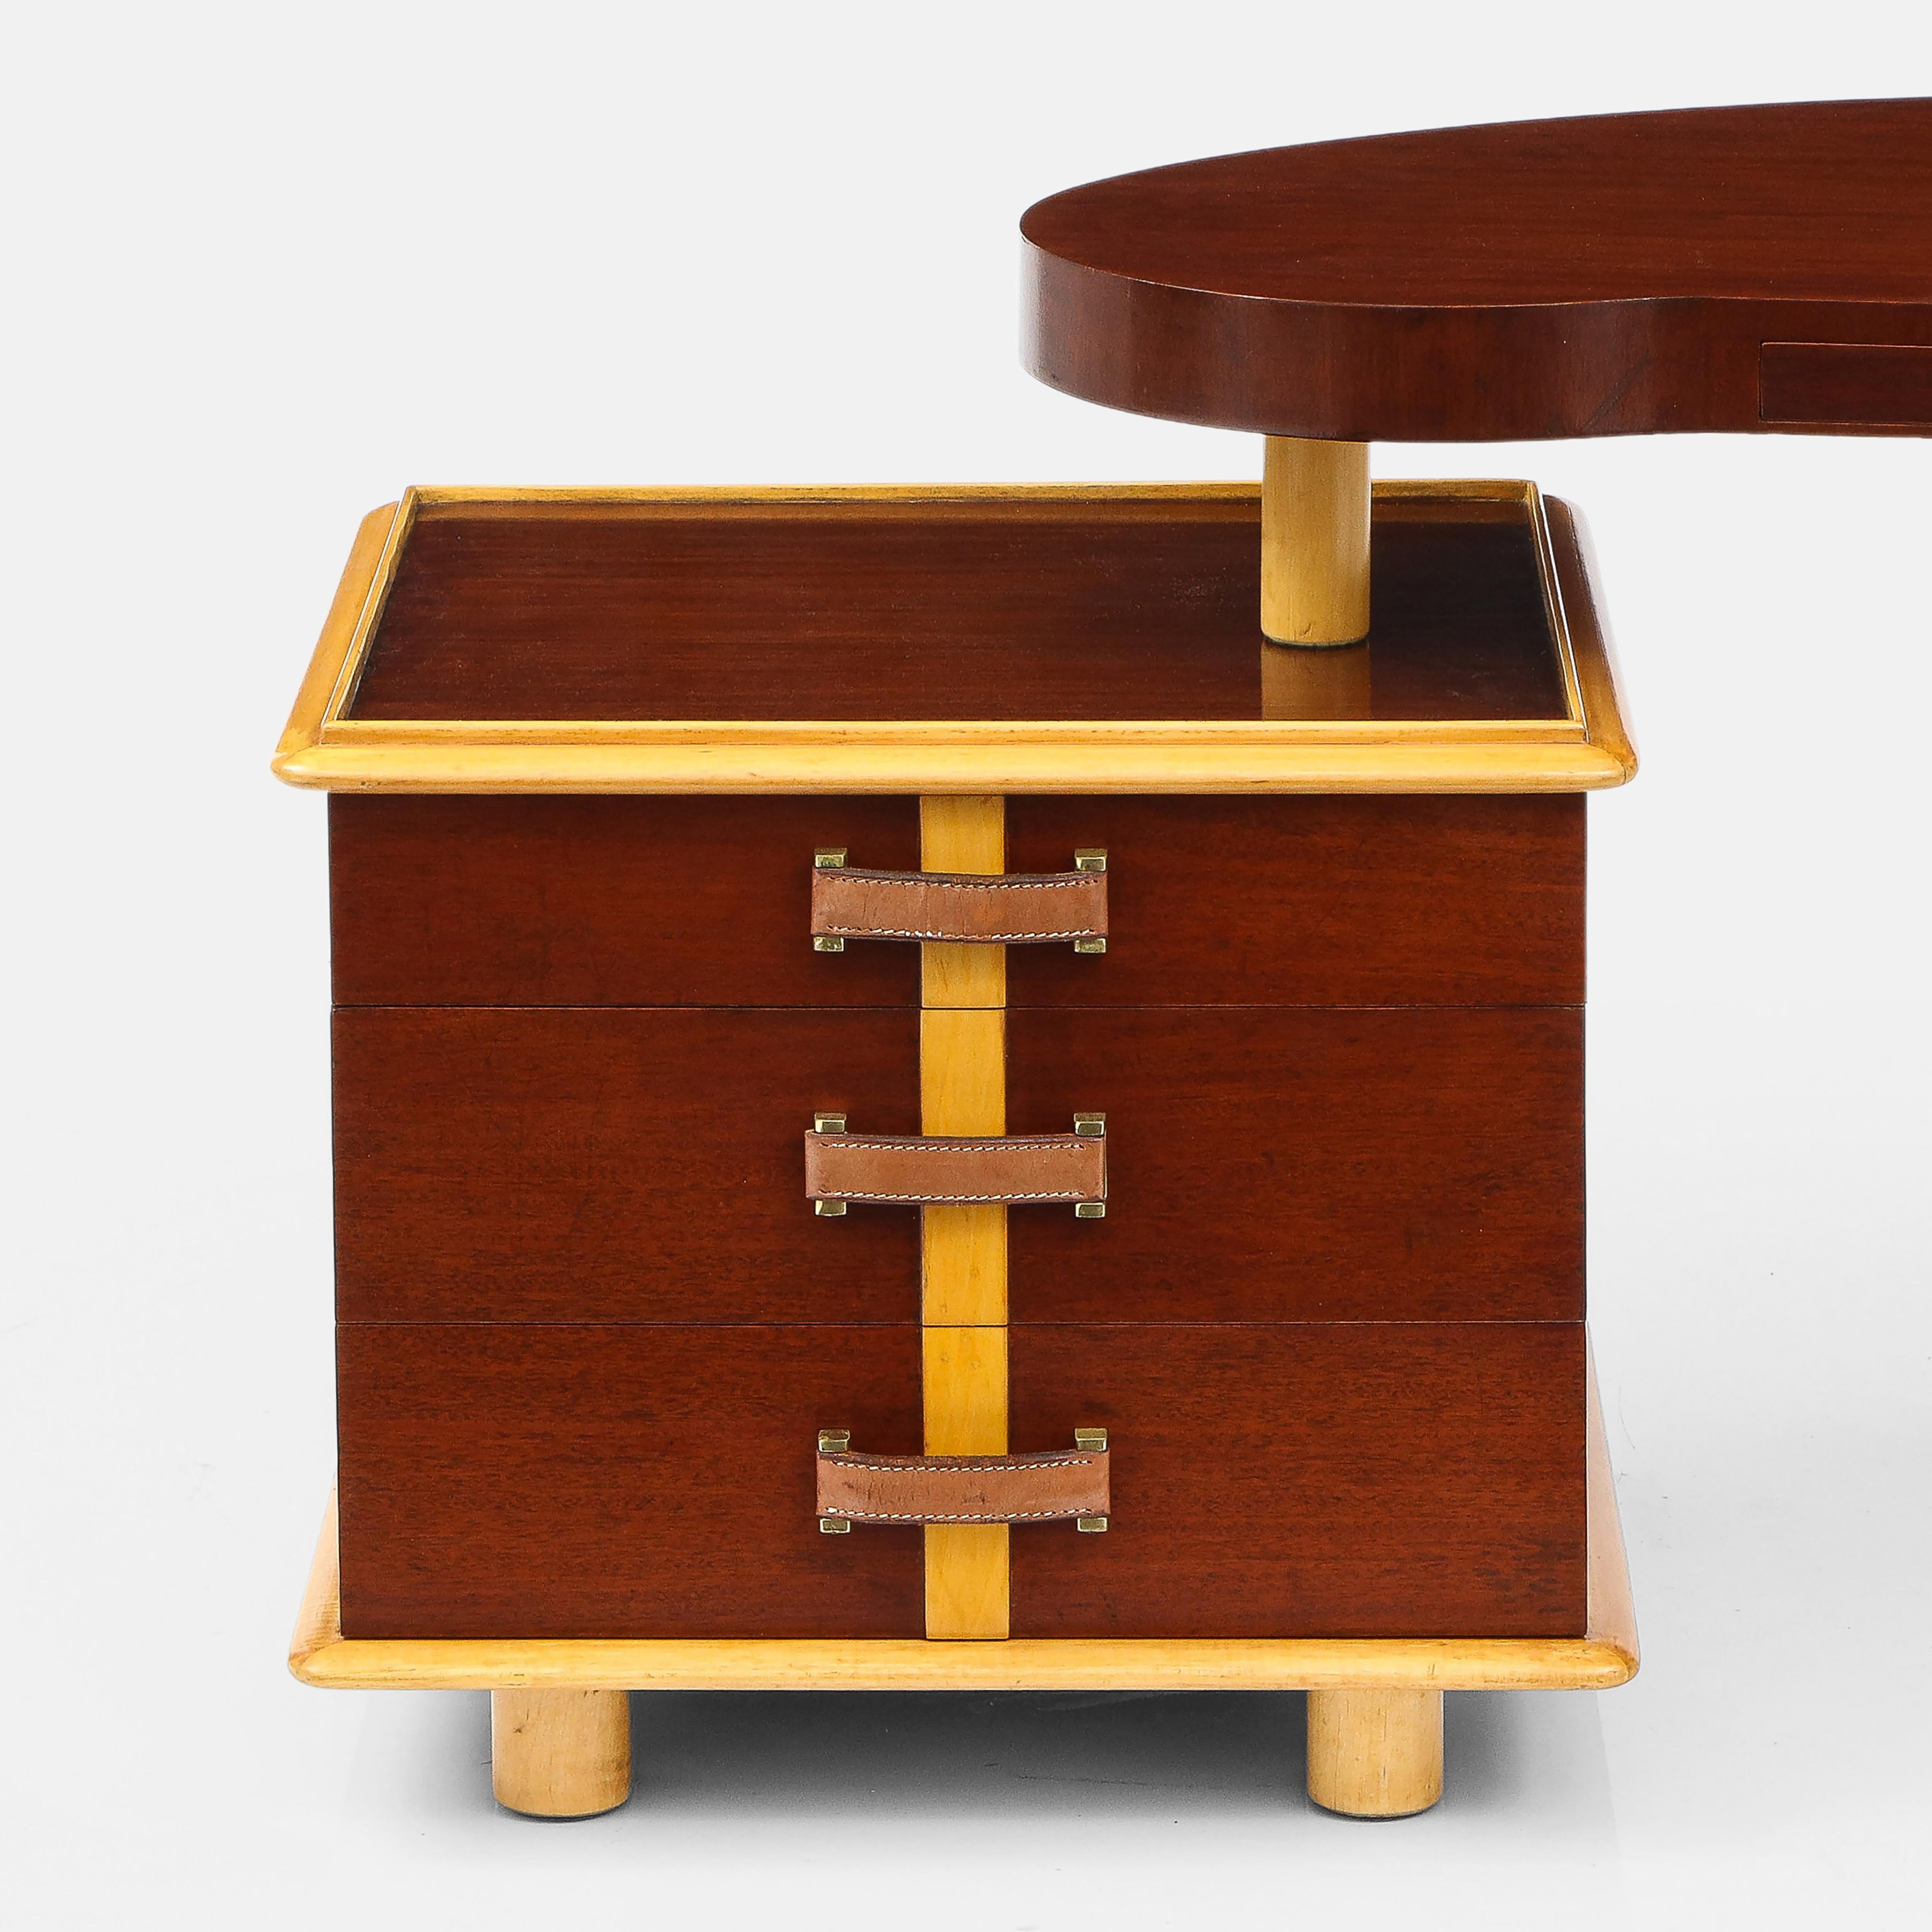 Paul Frankl Rare Kidney Desk in Mahogany, Birch, Leather and Brass, USA, 1950s For Sale 1